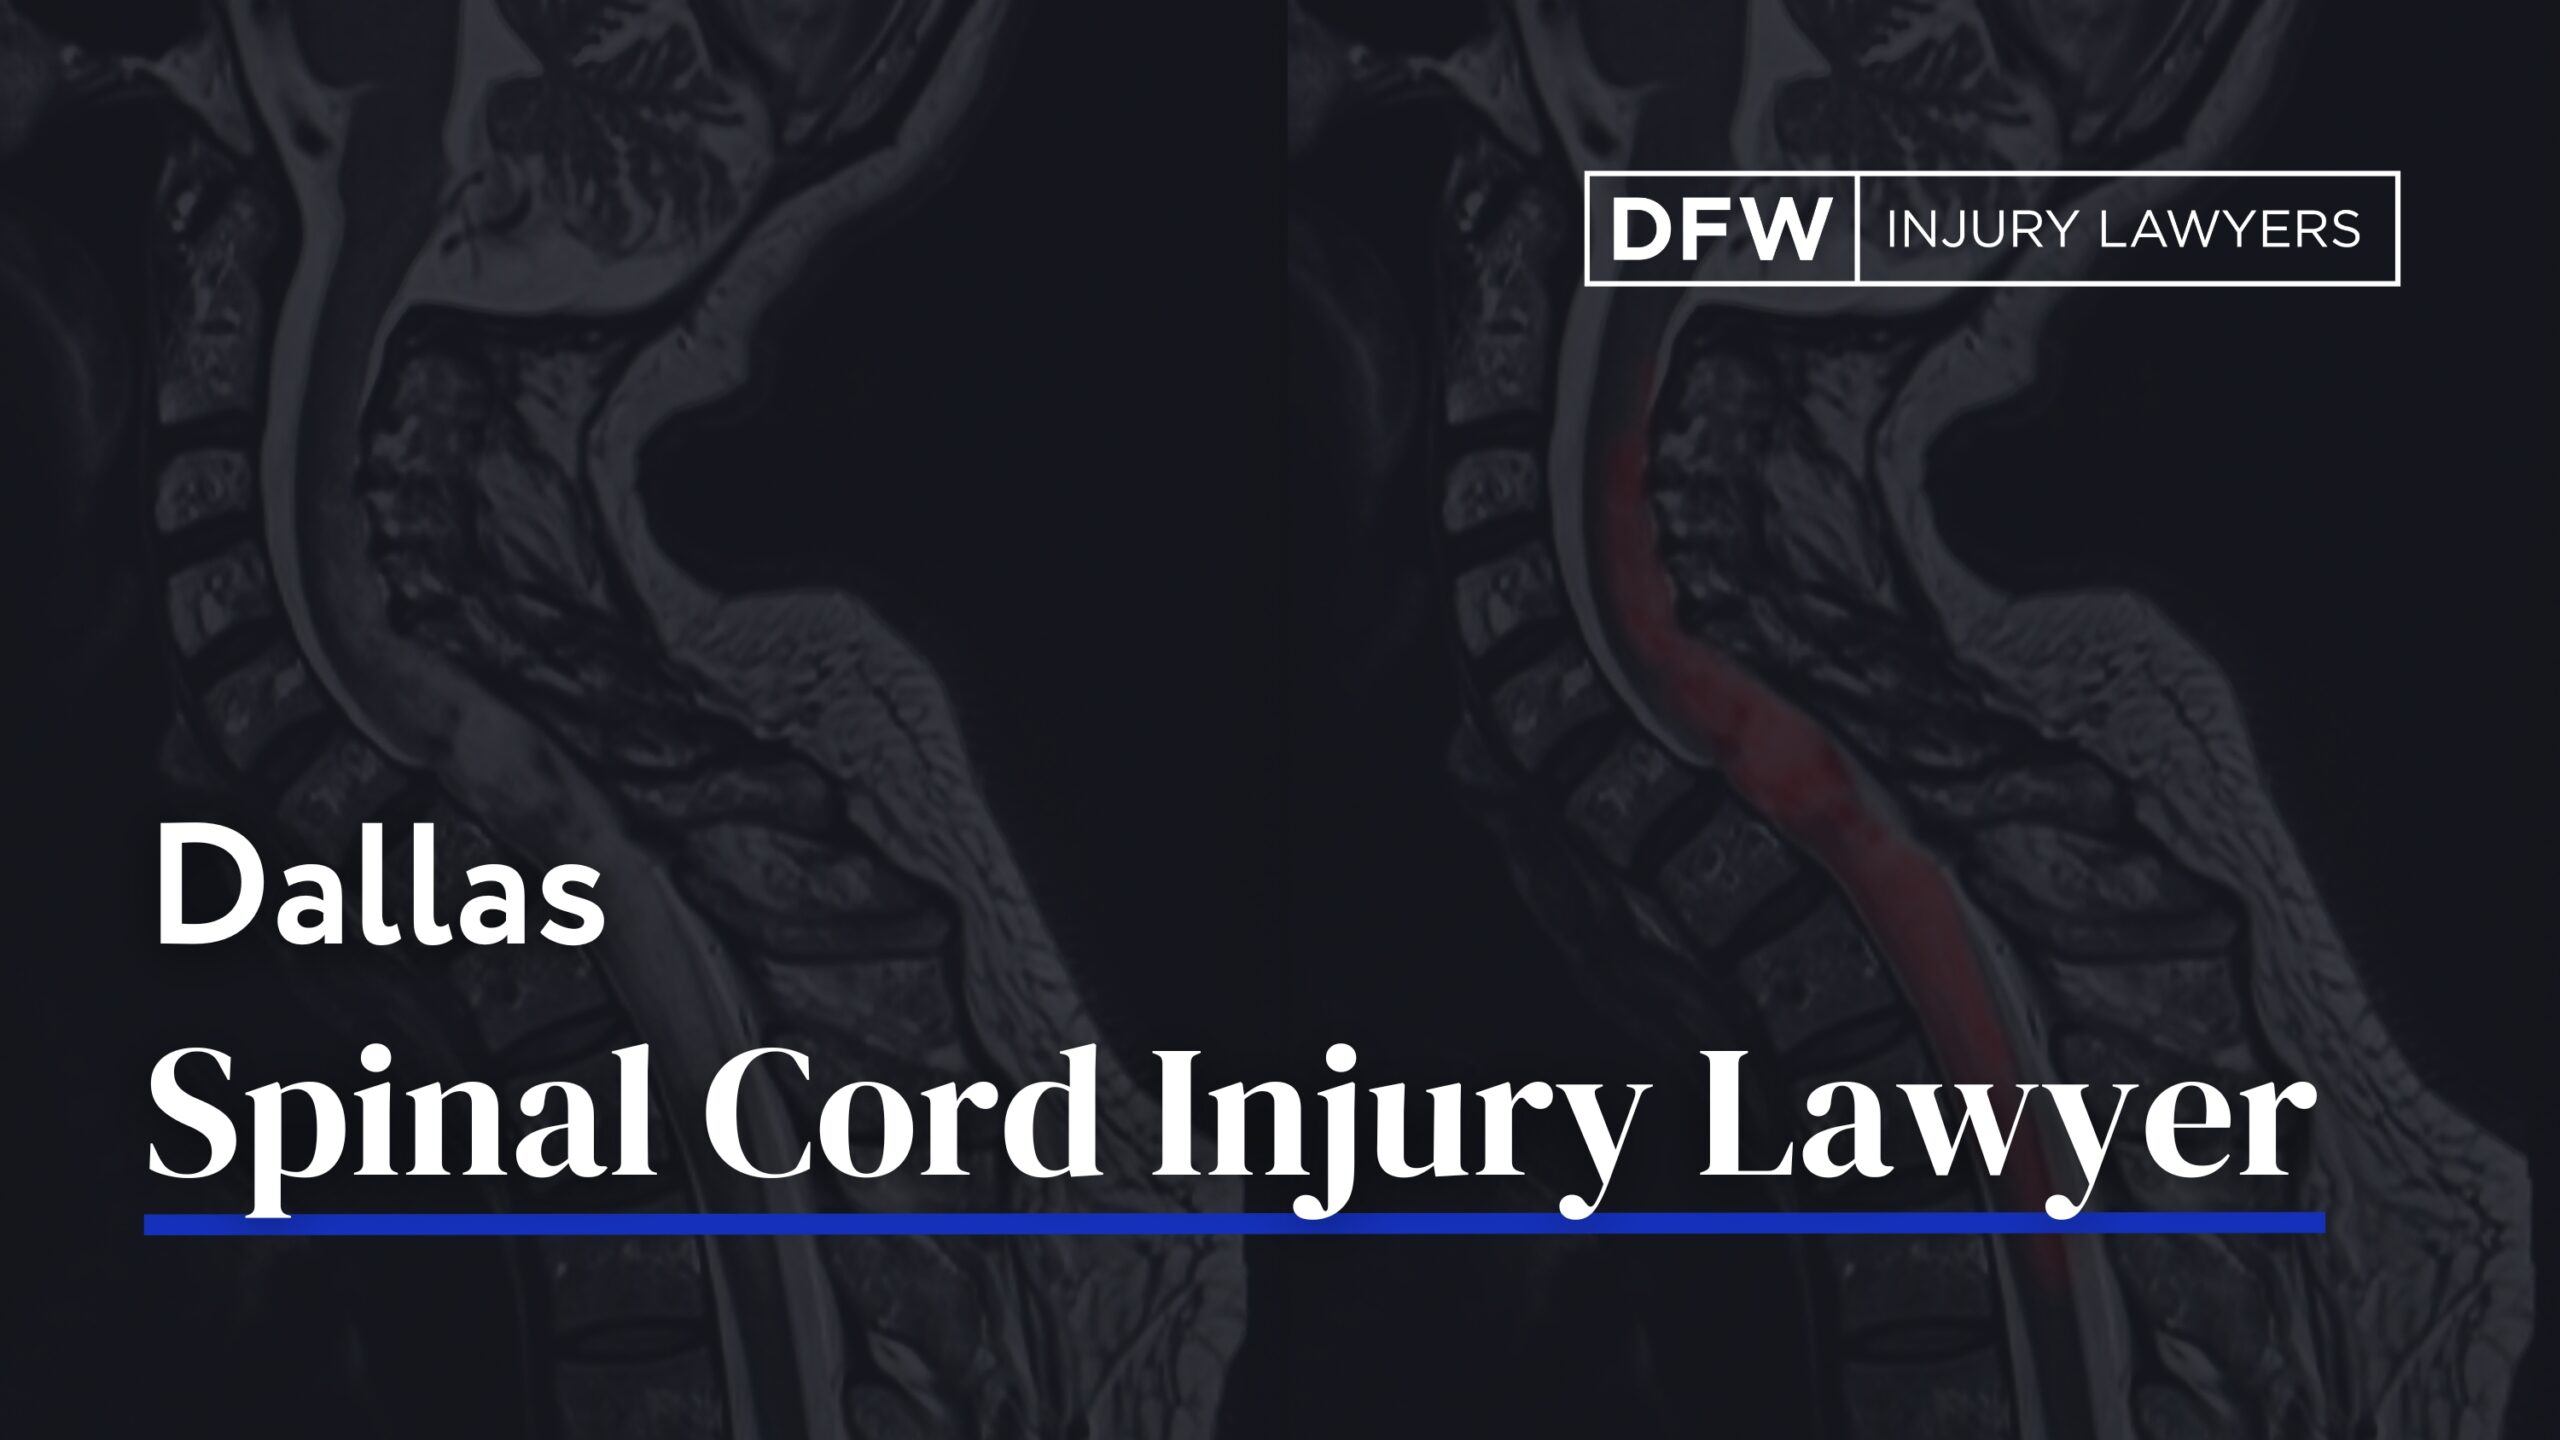 Dallas Spinal Cord Injury Lawyer - DFW